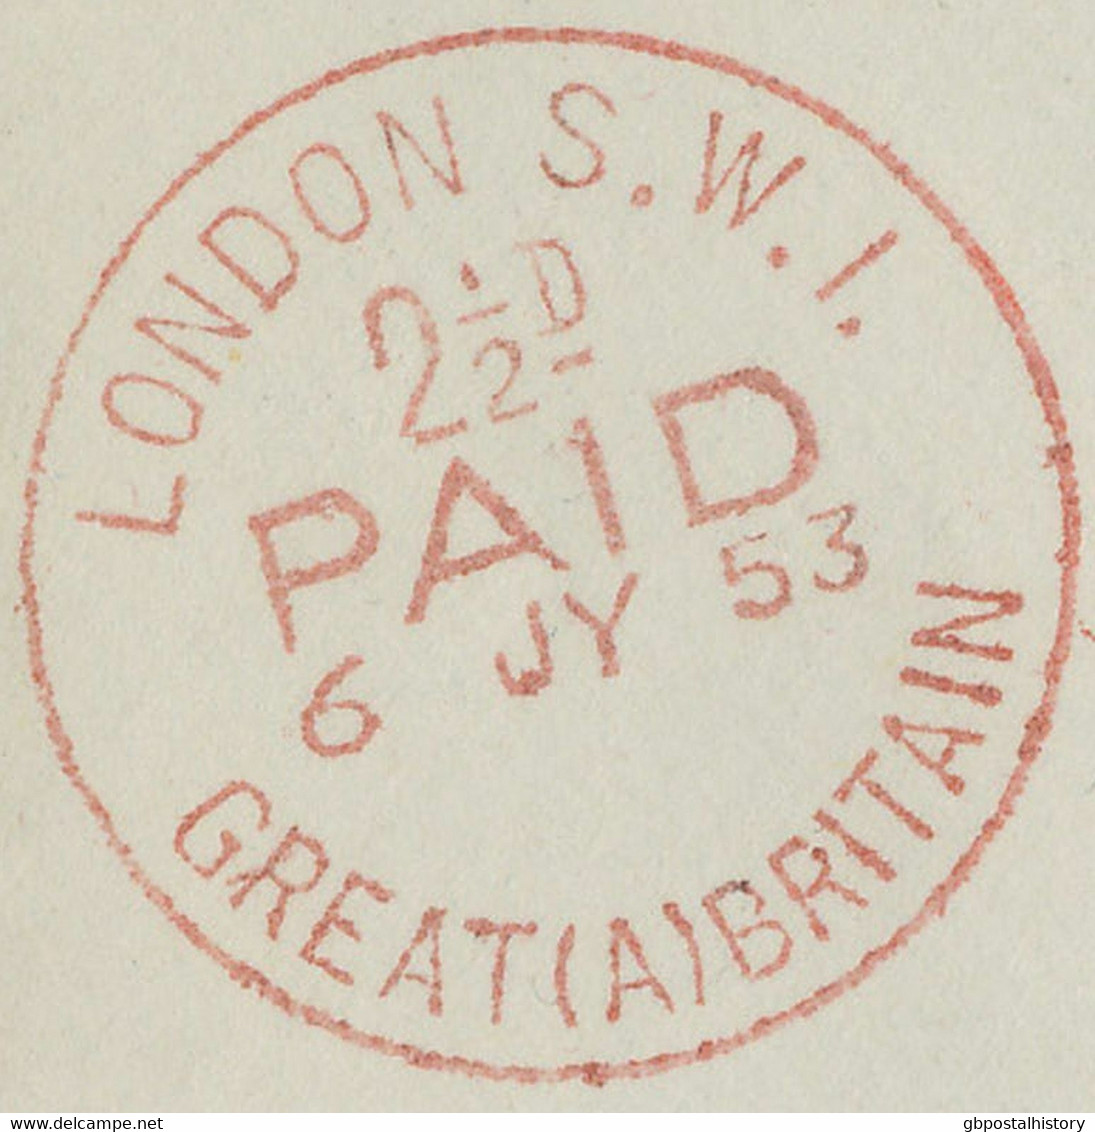 GB "LONDON S.W.I. / 2 1/2 D. / PAID / 6 JY 53 / GREAT (A) BRITAIN" Roter CDS Cvr - Service